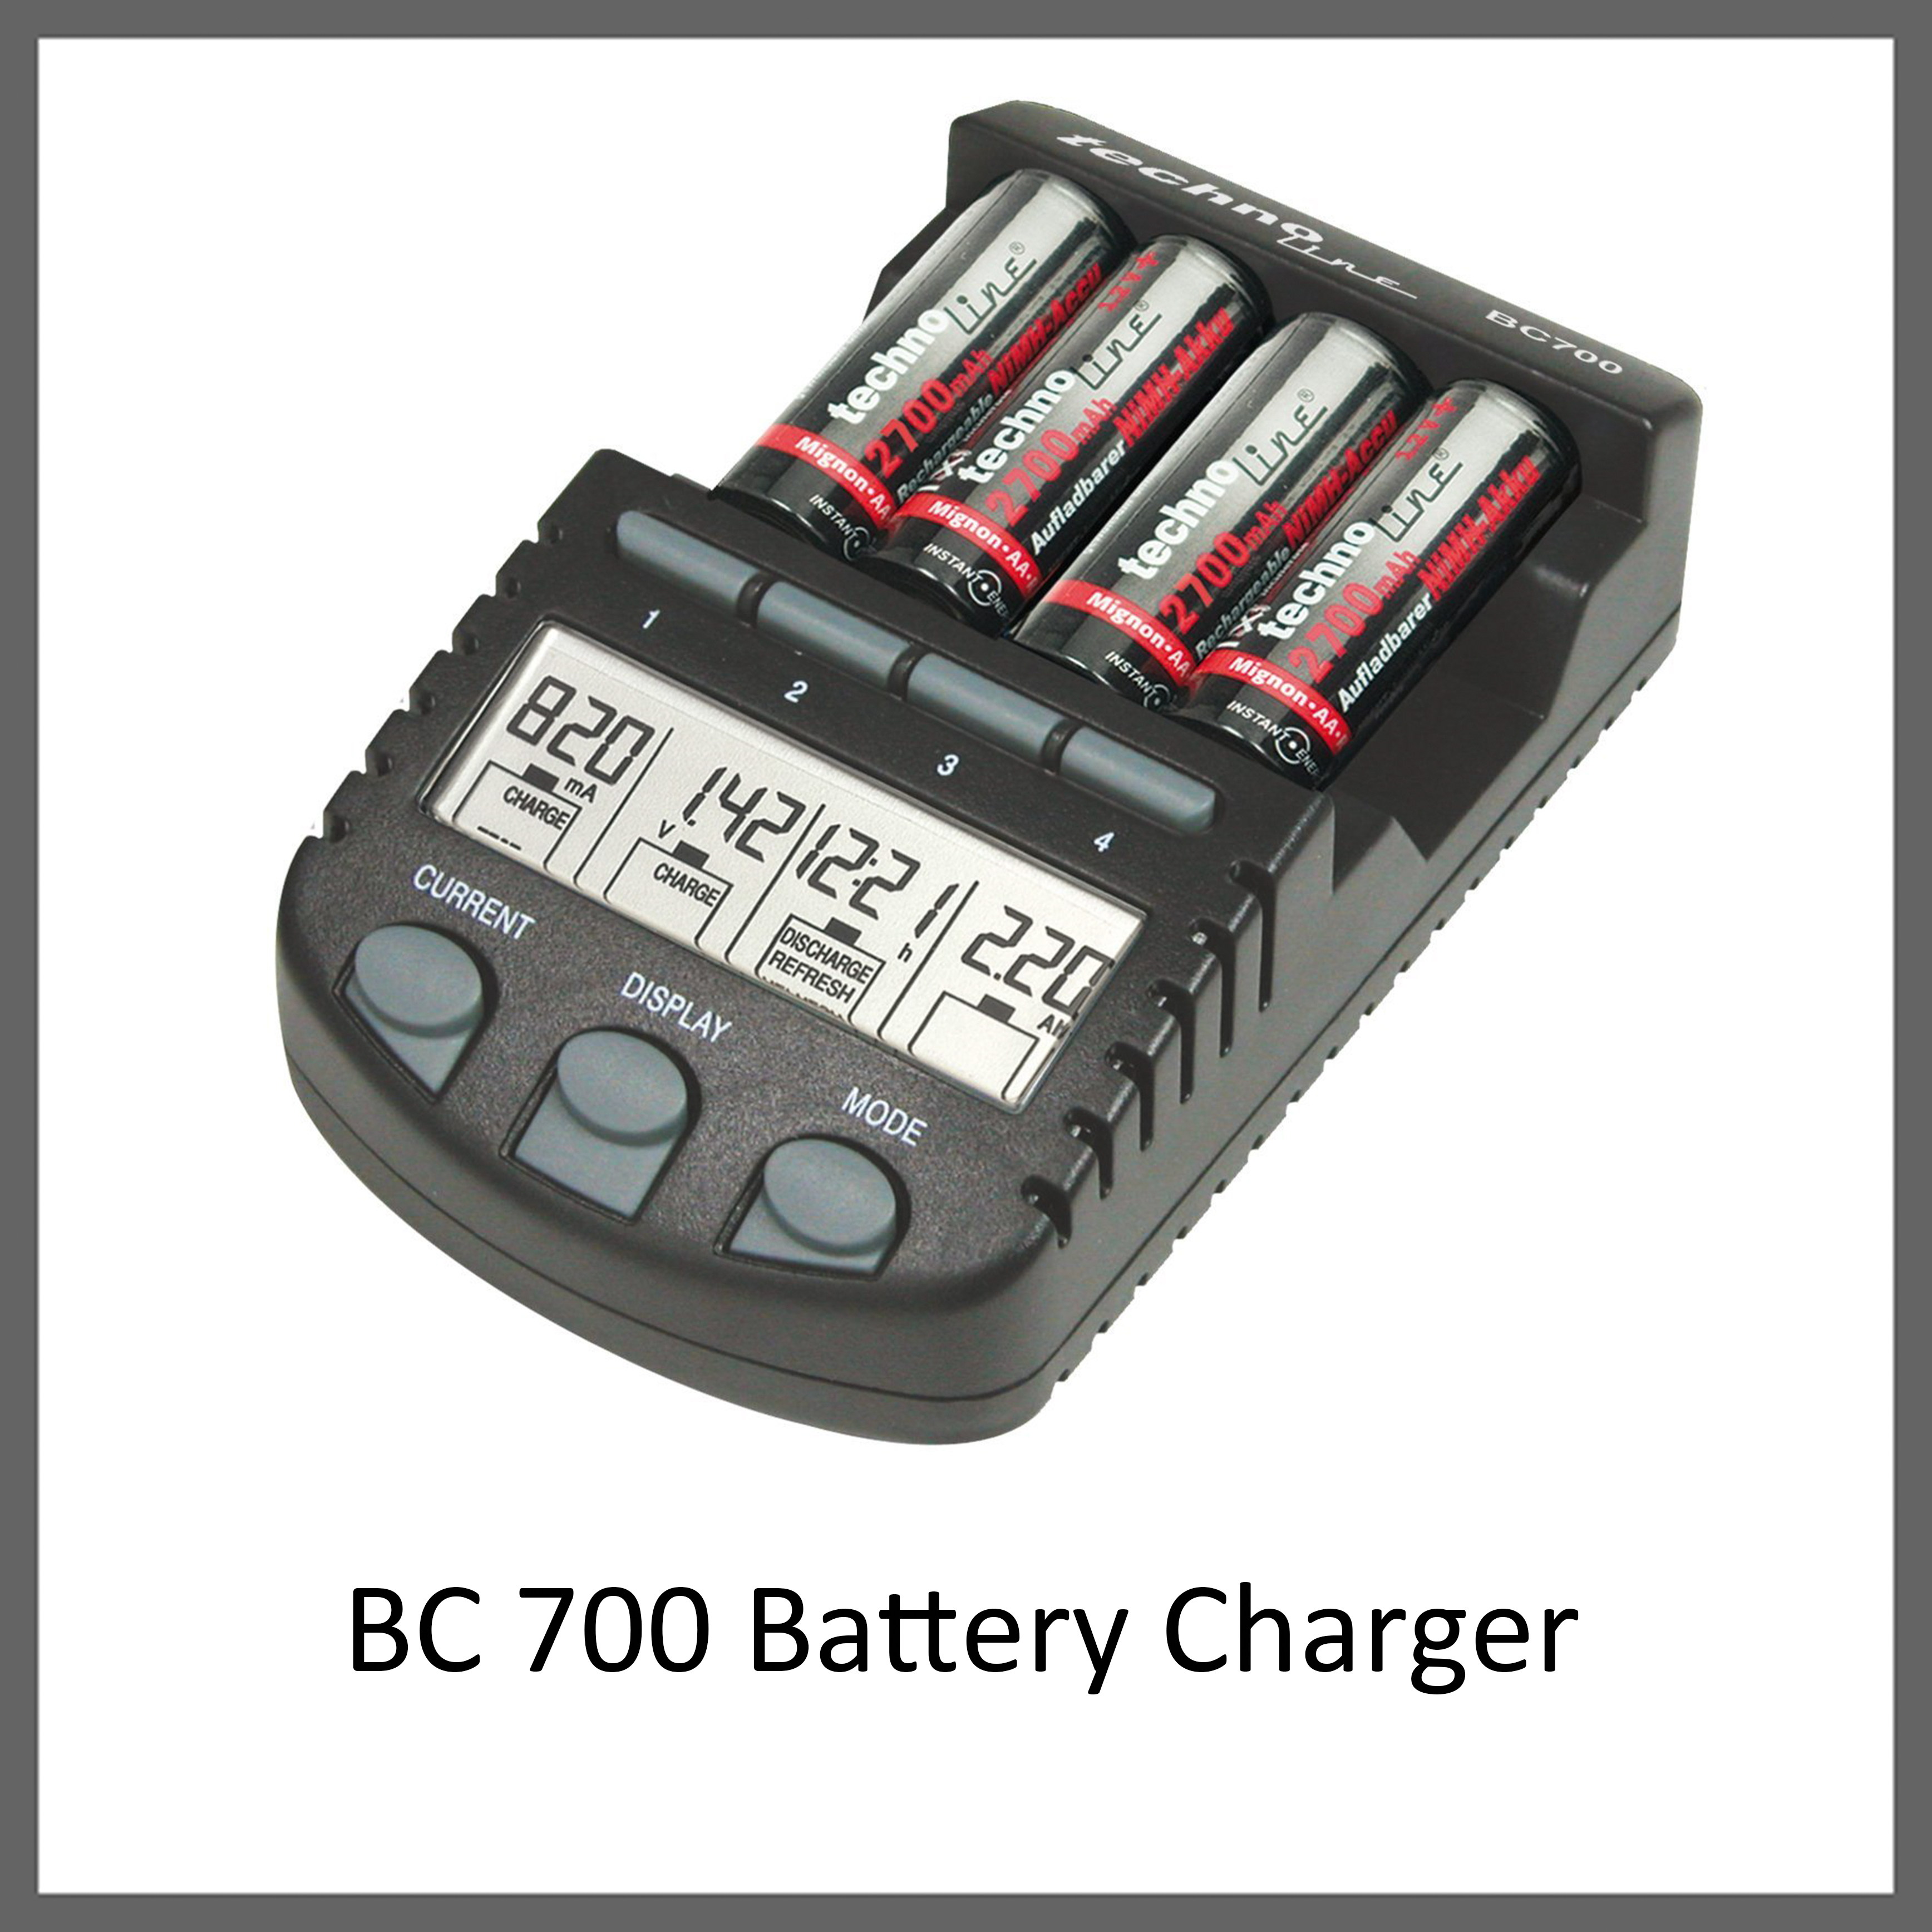 BC-700 Battery Charger